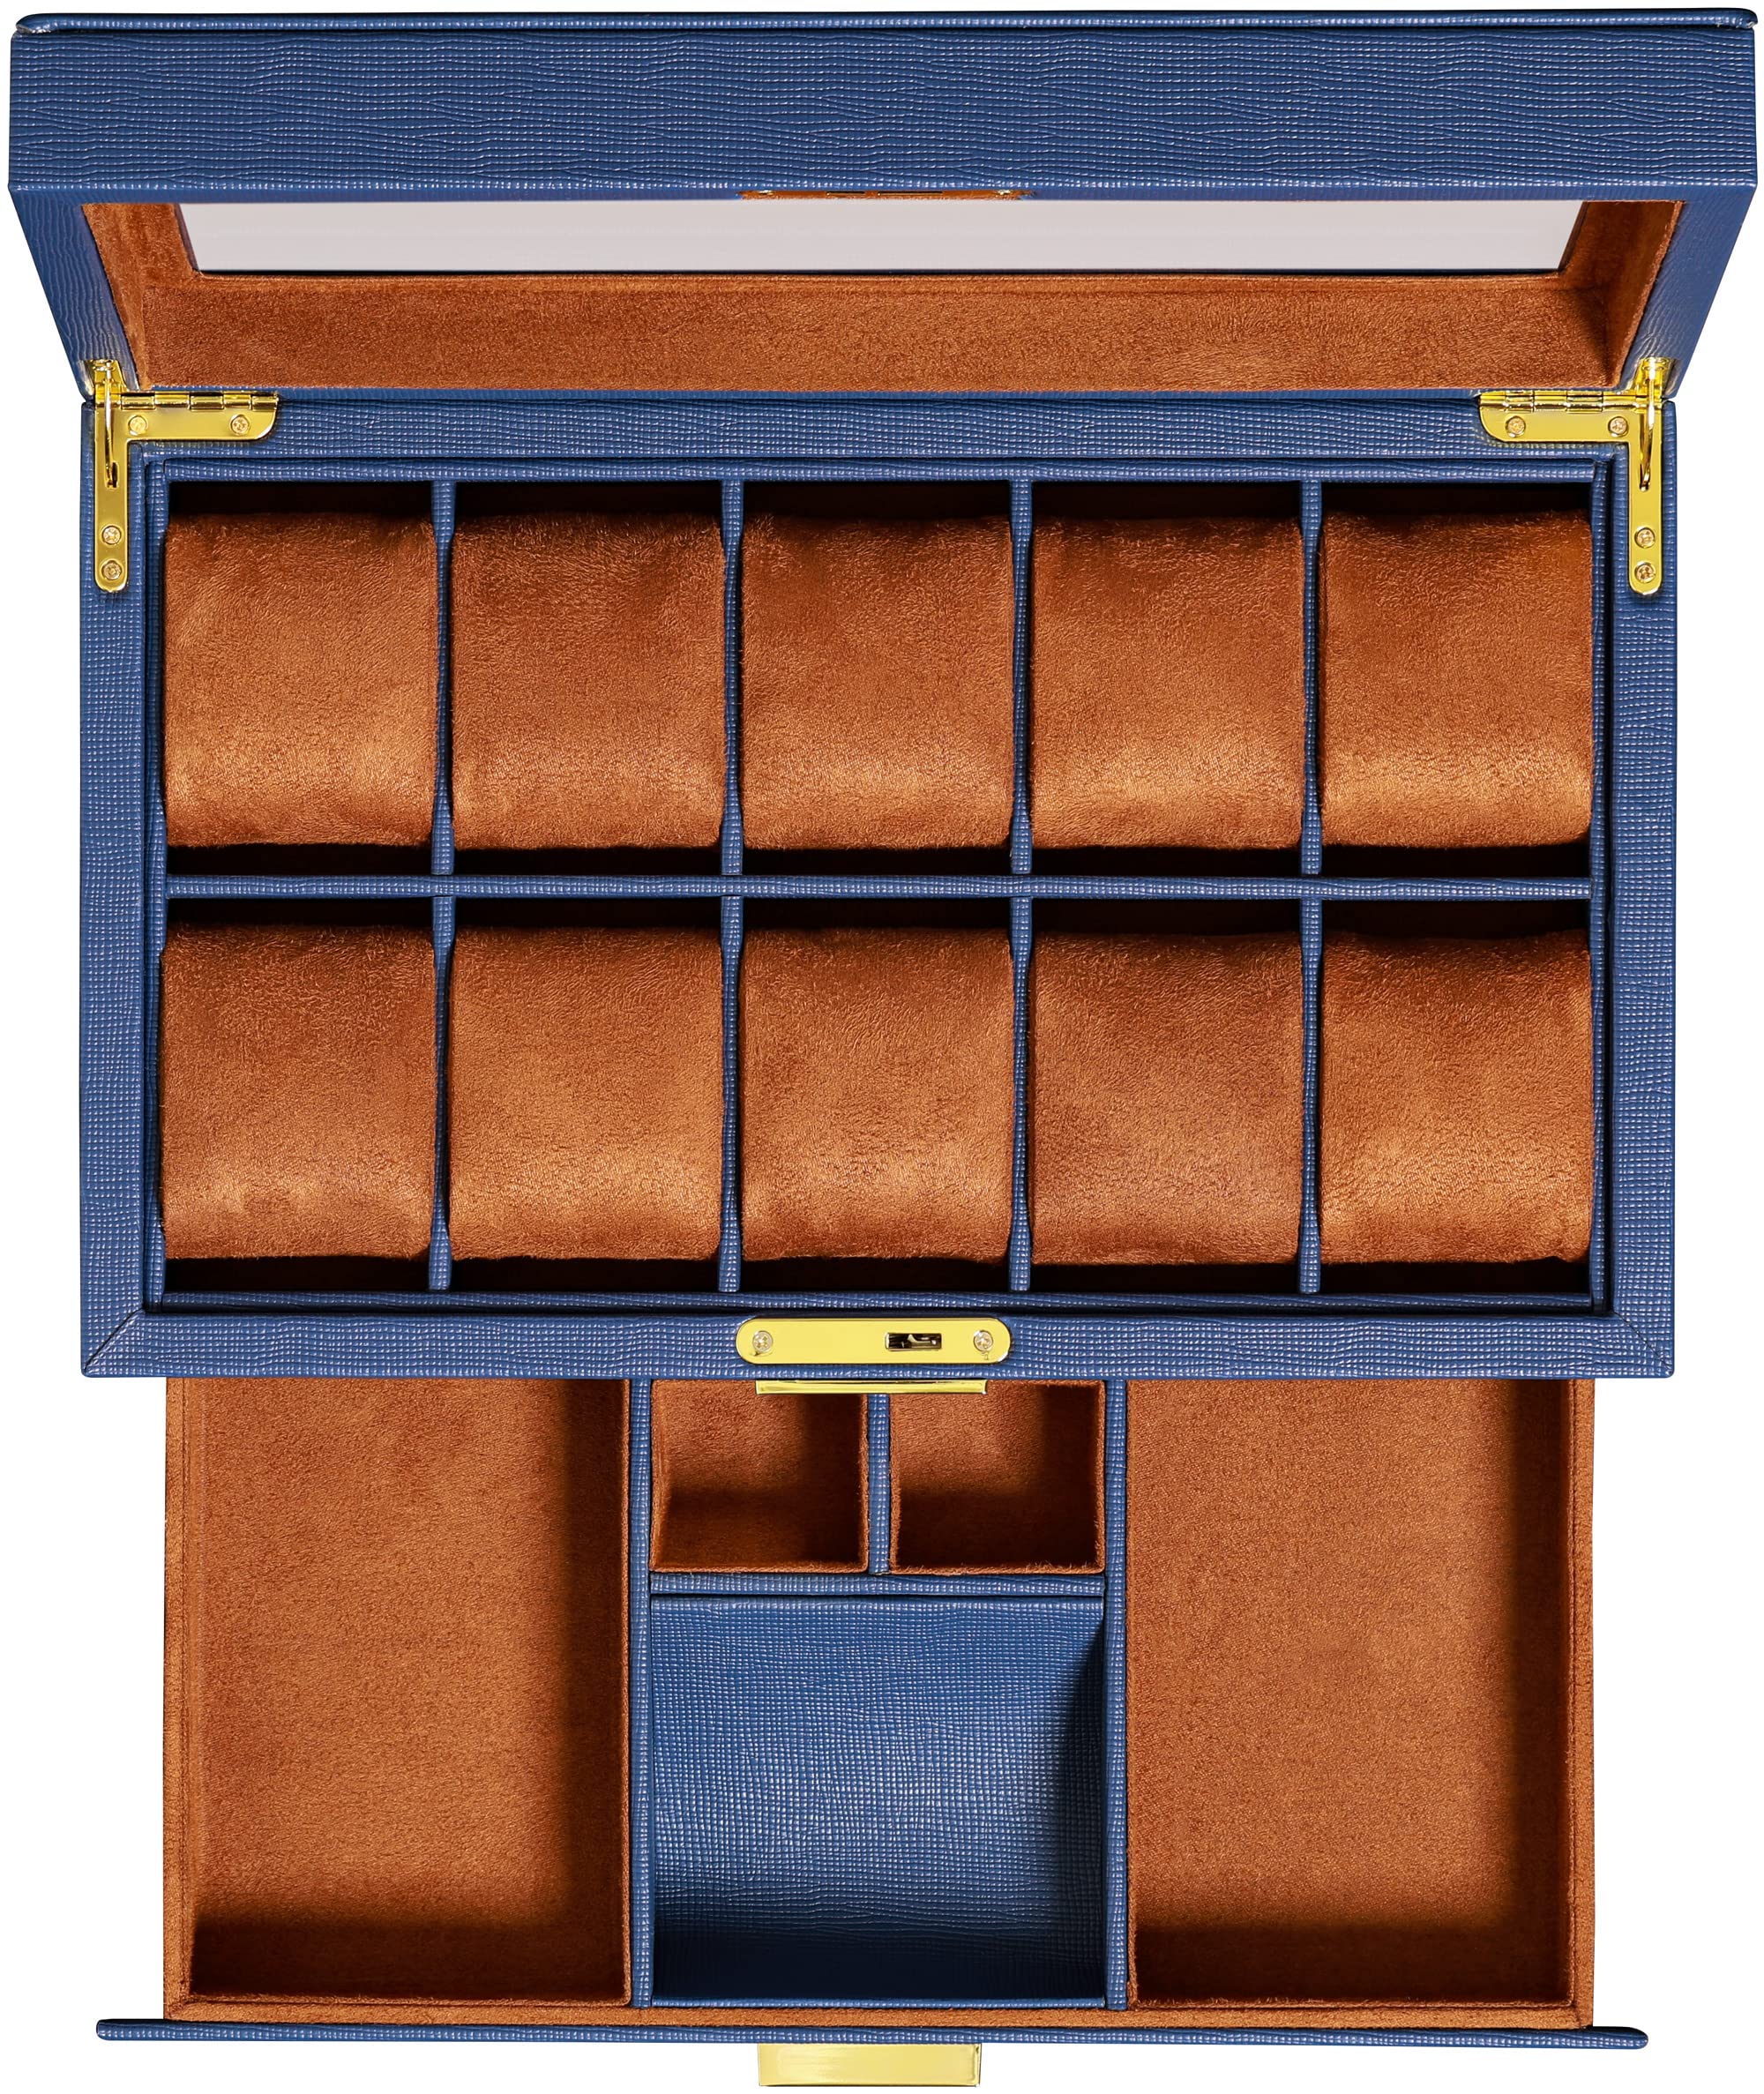 10 Slot Leather Watch Box with Matching 3 Slot Watch Roll - Luxury Watch Case Display Organizer Microsuede Liner, Locking Mens Jewelry Watches Holder, Men's Storage Boxes Holder Glass Top Blue/Tan